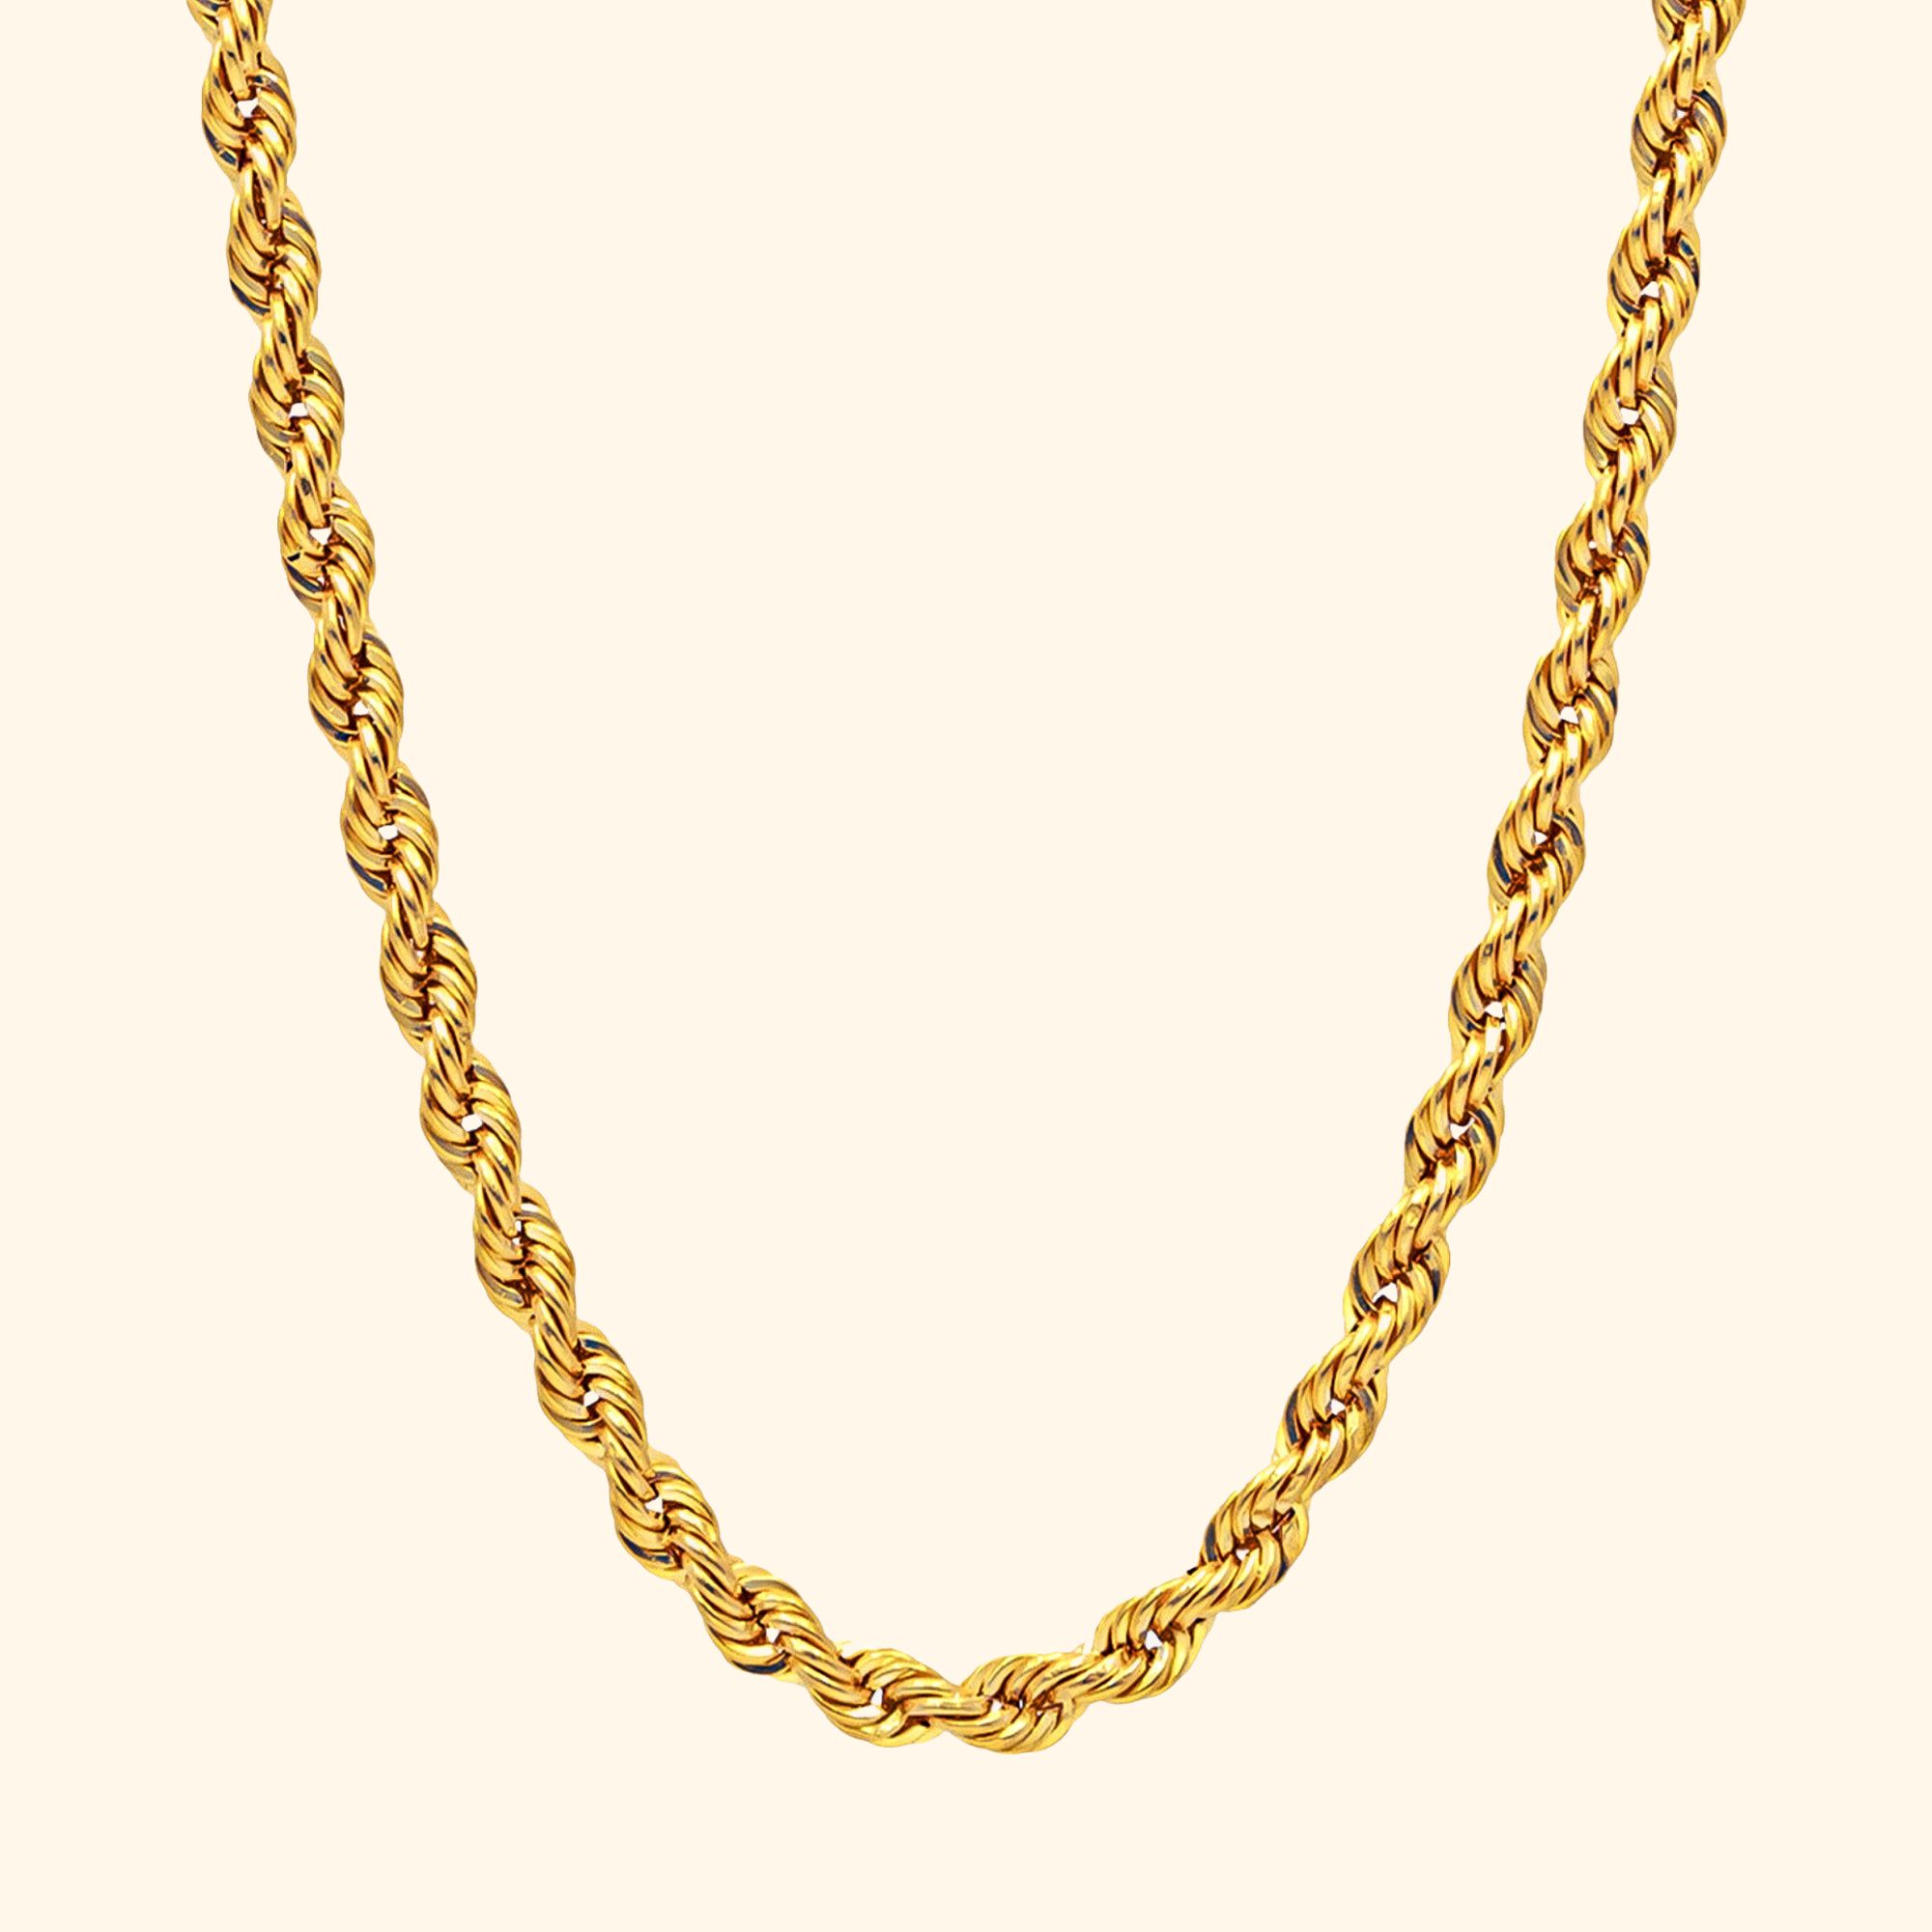 916 Gold hollow rope 2.5mm series chain necklace gold jewellery in singapore